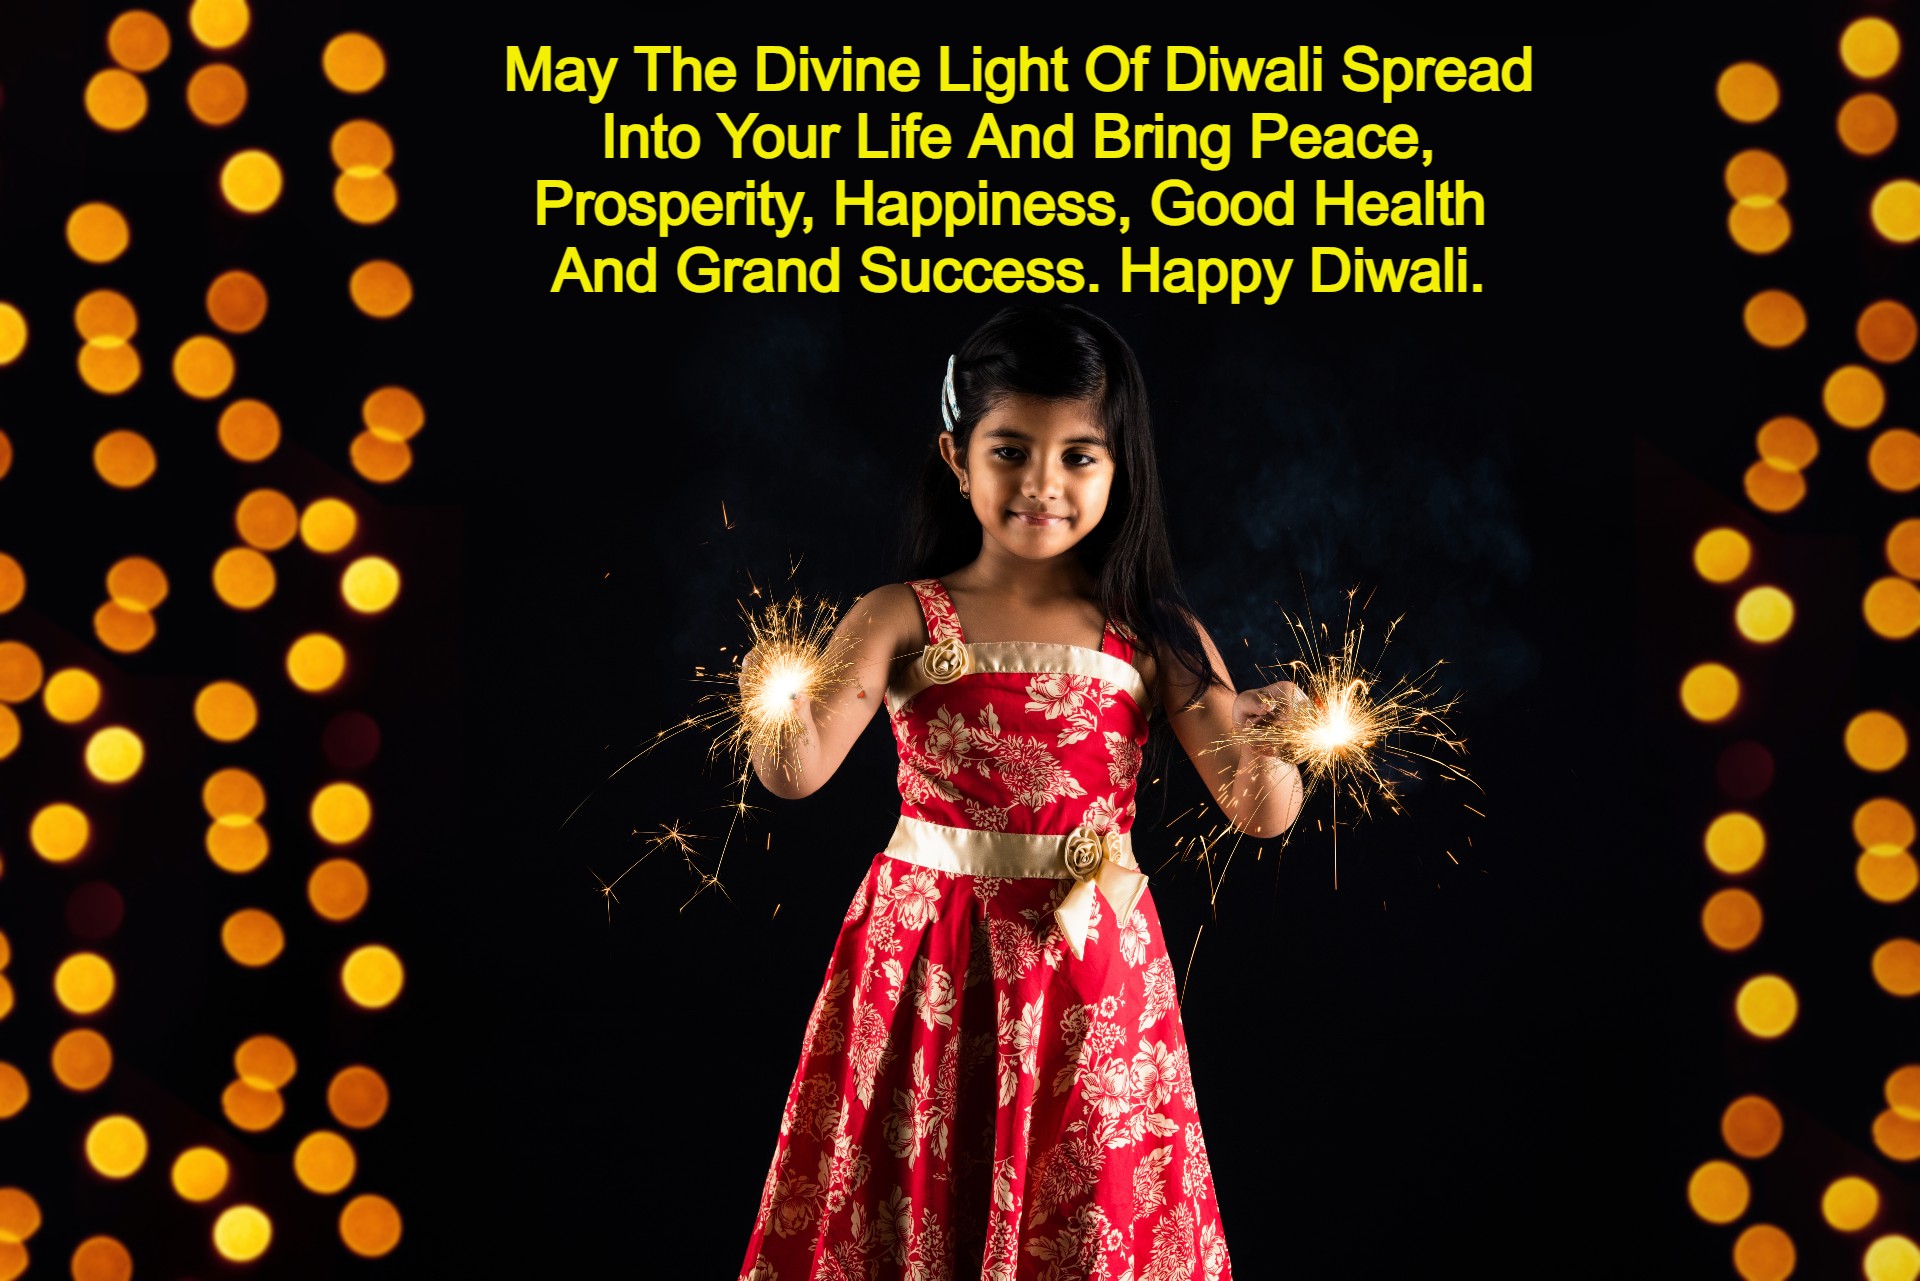 Happy Diwali 2022: Best Wishes, messages, quotes, greetings, SMS, WhatsApp and Facebook status to share with your family and friends. (Image: Shutterstock) 